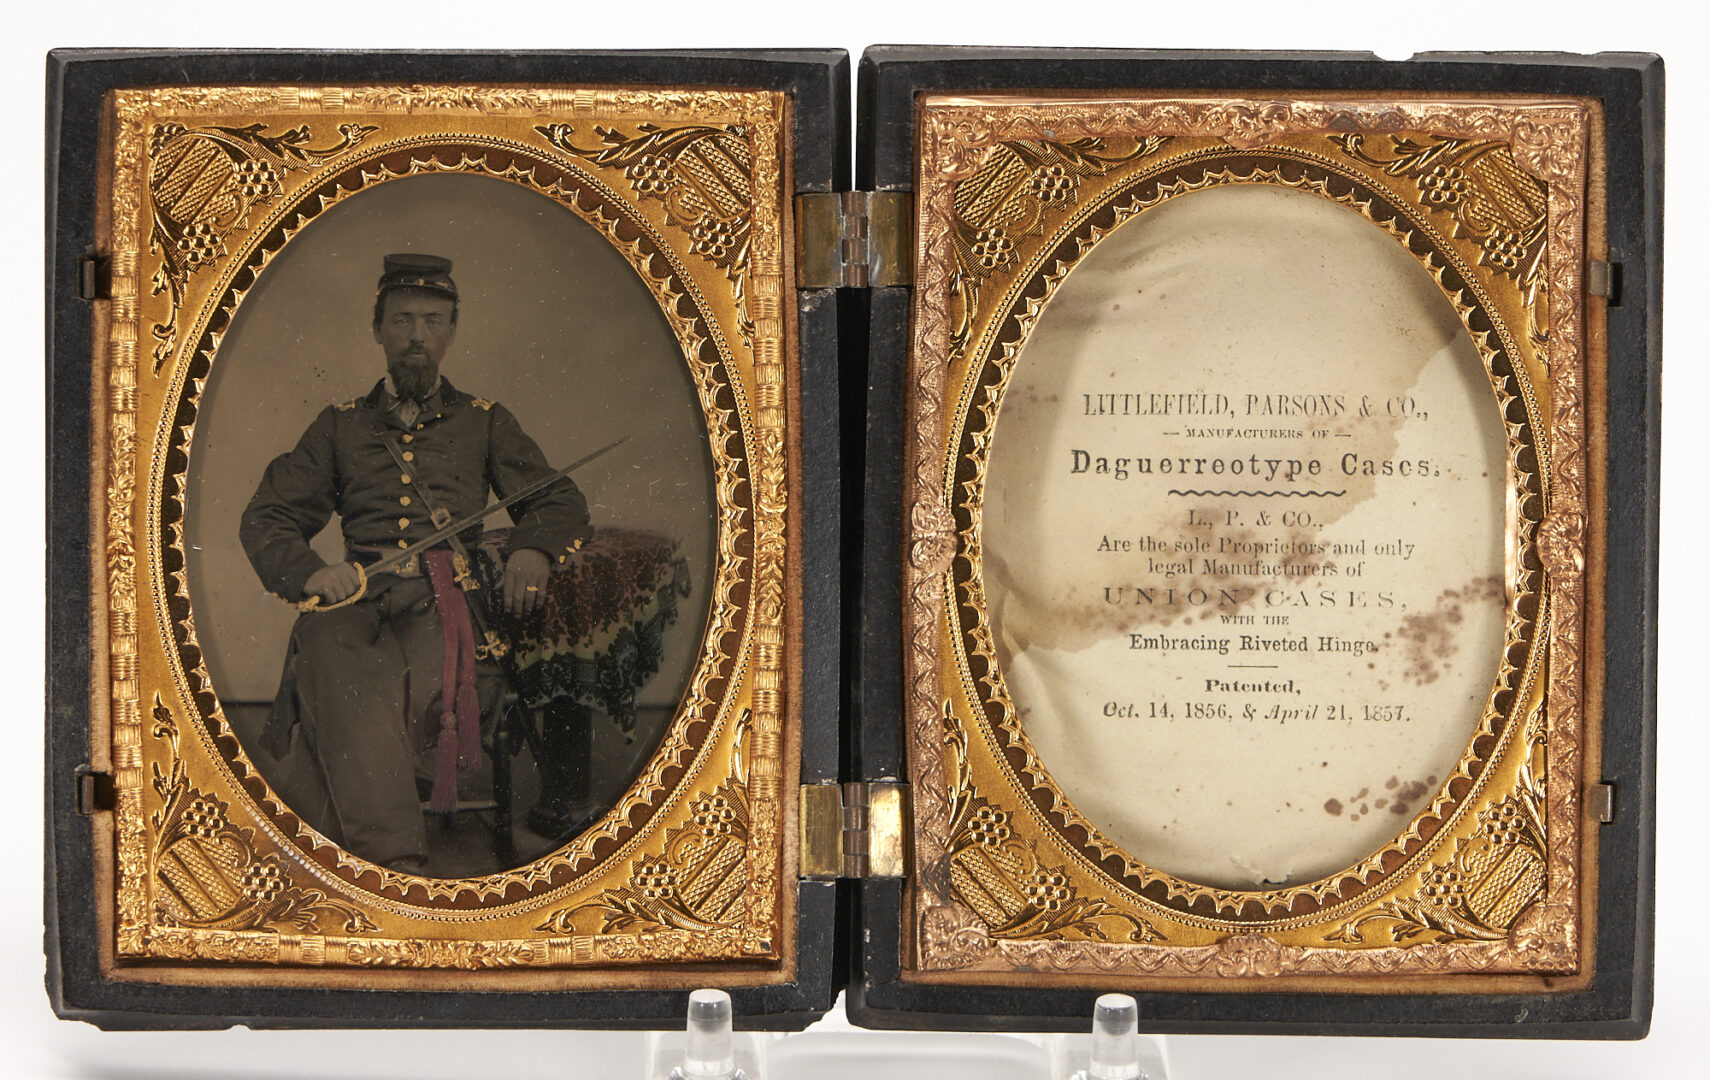 Lot 571: Group of 3 Civil War Related CDVs, incl. TN William Milburn, & Union Officer Ambrotype